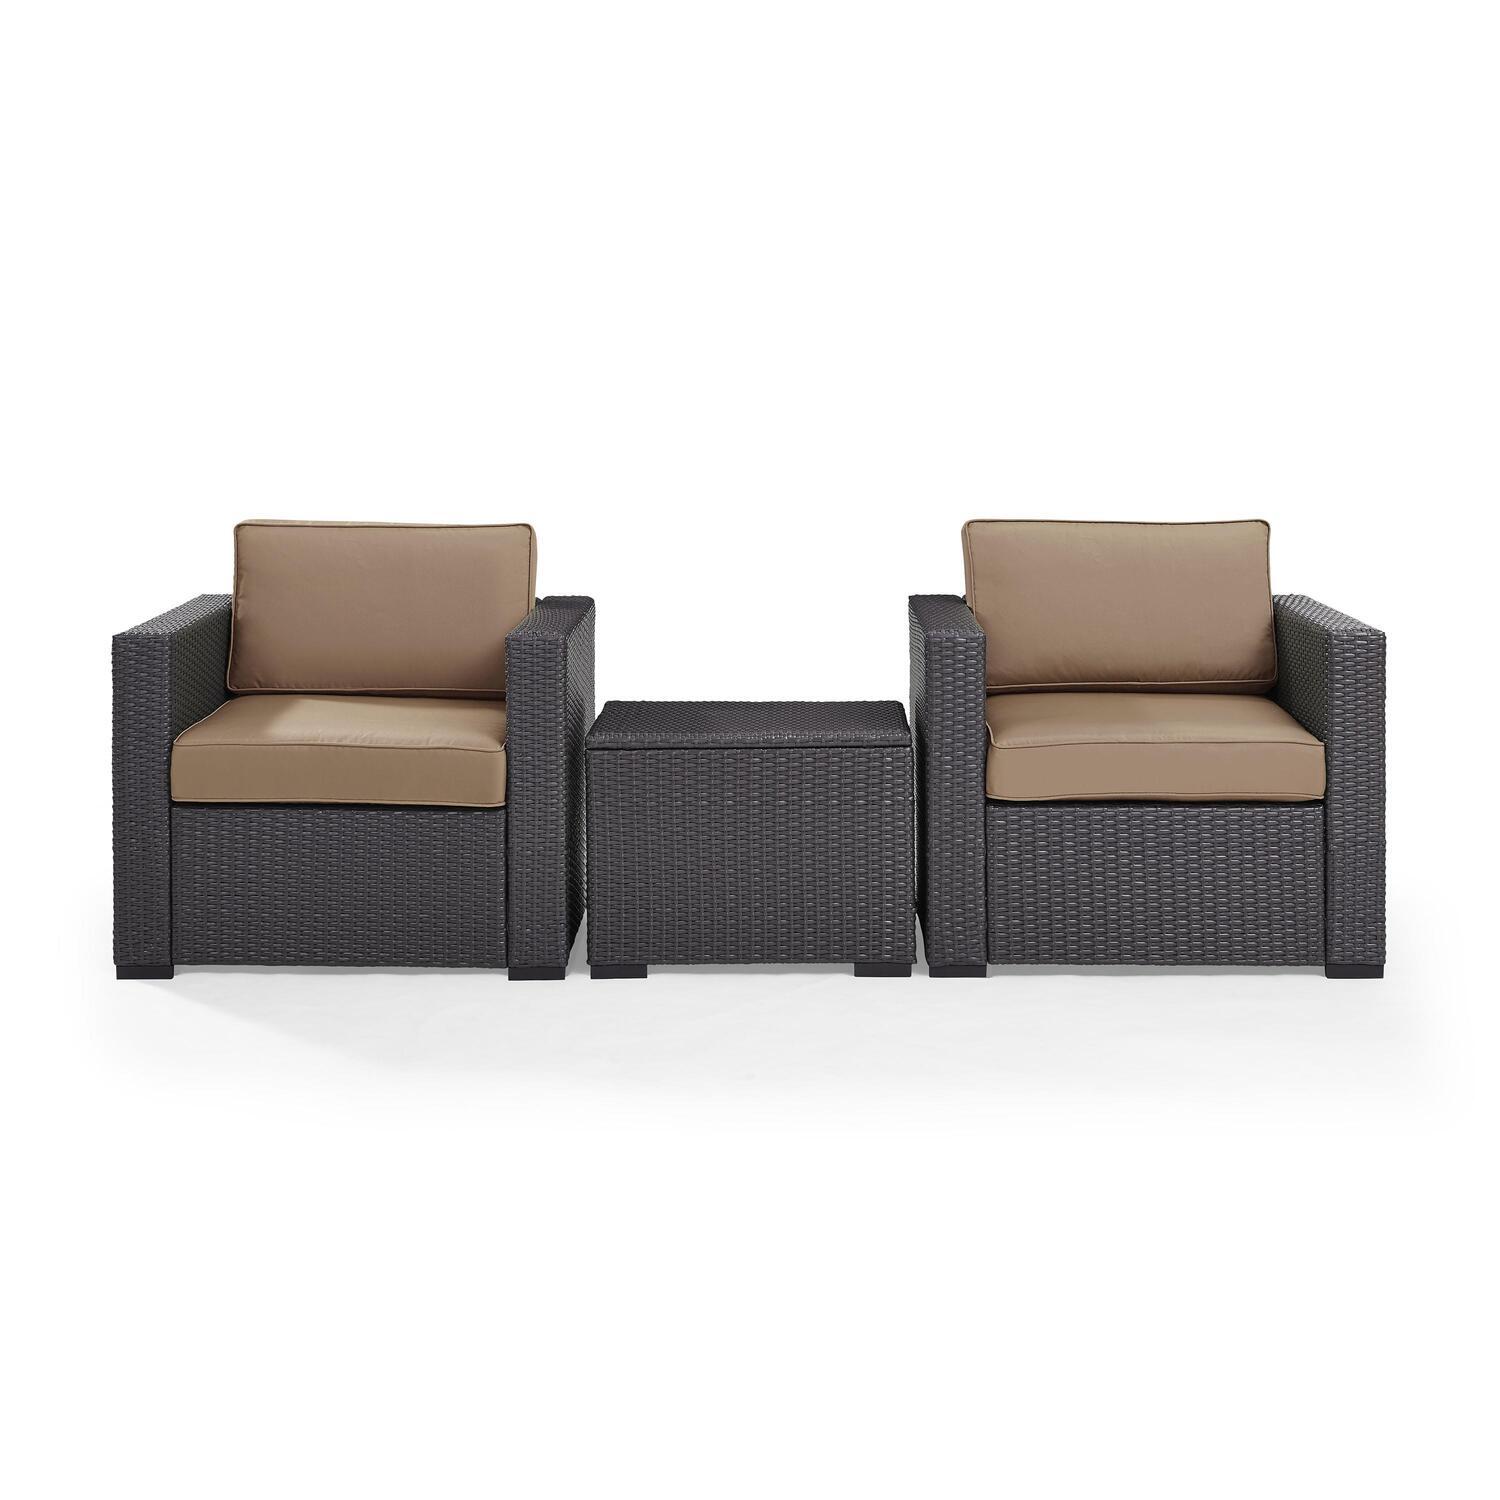 Crosley Furniture Biscayne 3 Piece Fabric Patio Conversation Set in Brown/Mocha - image 1 of 10